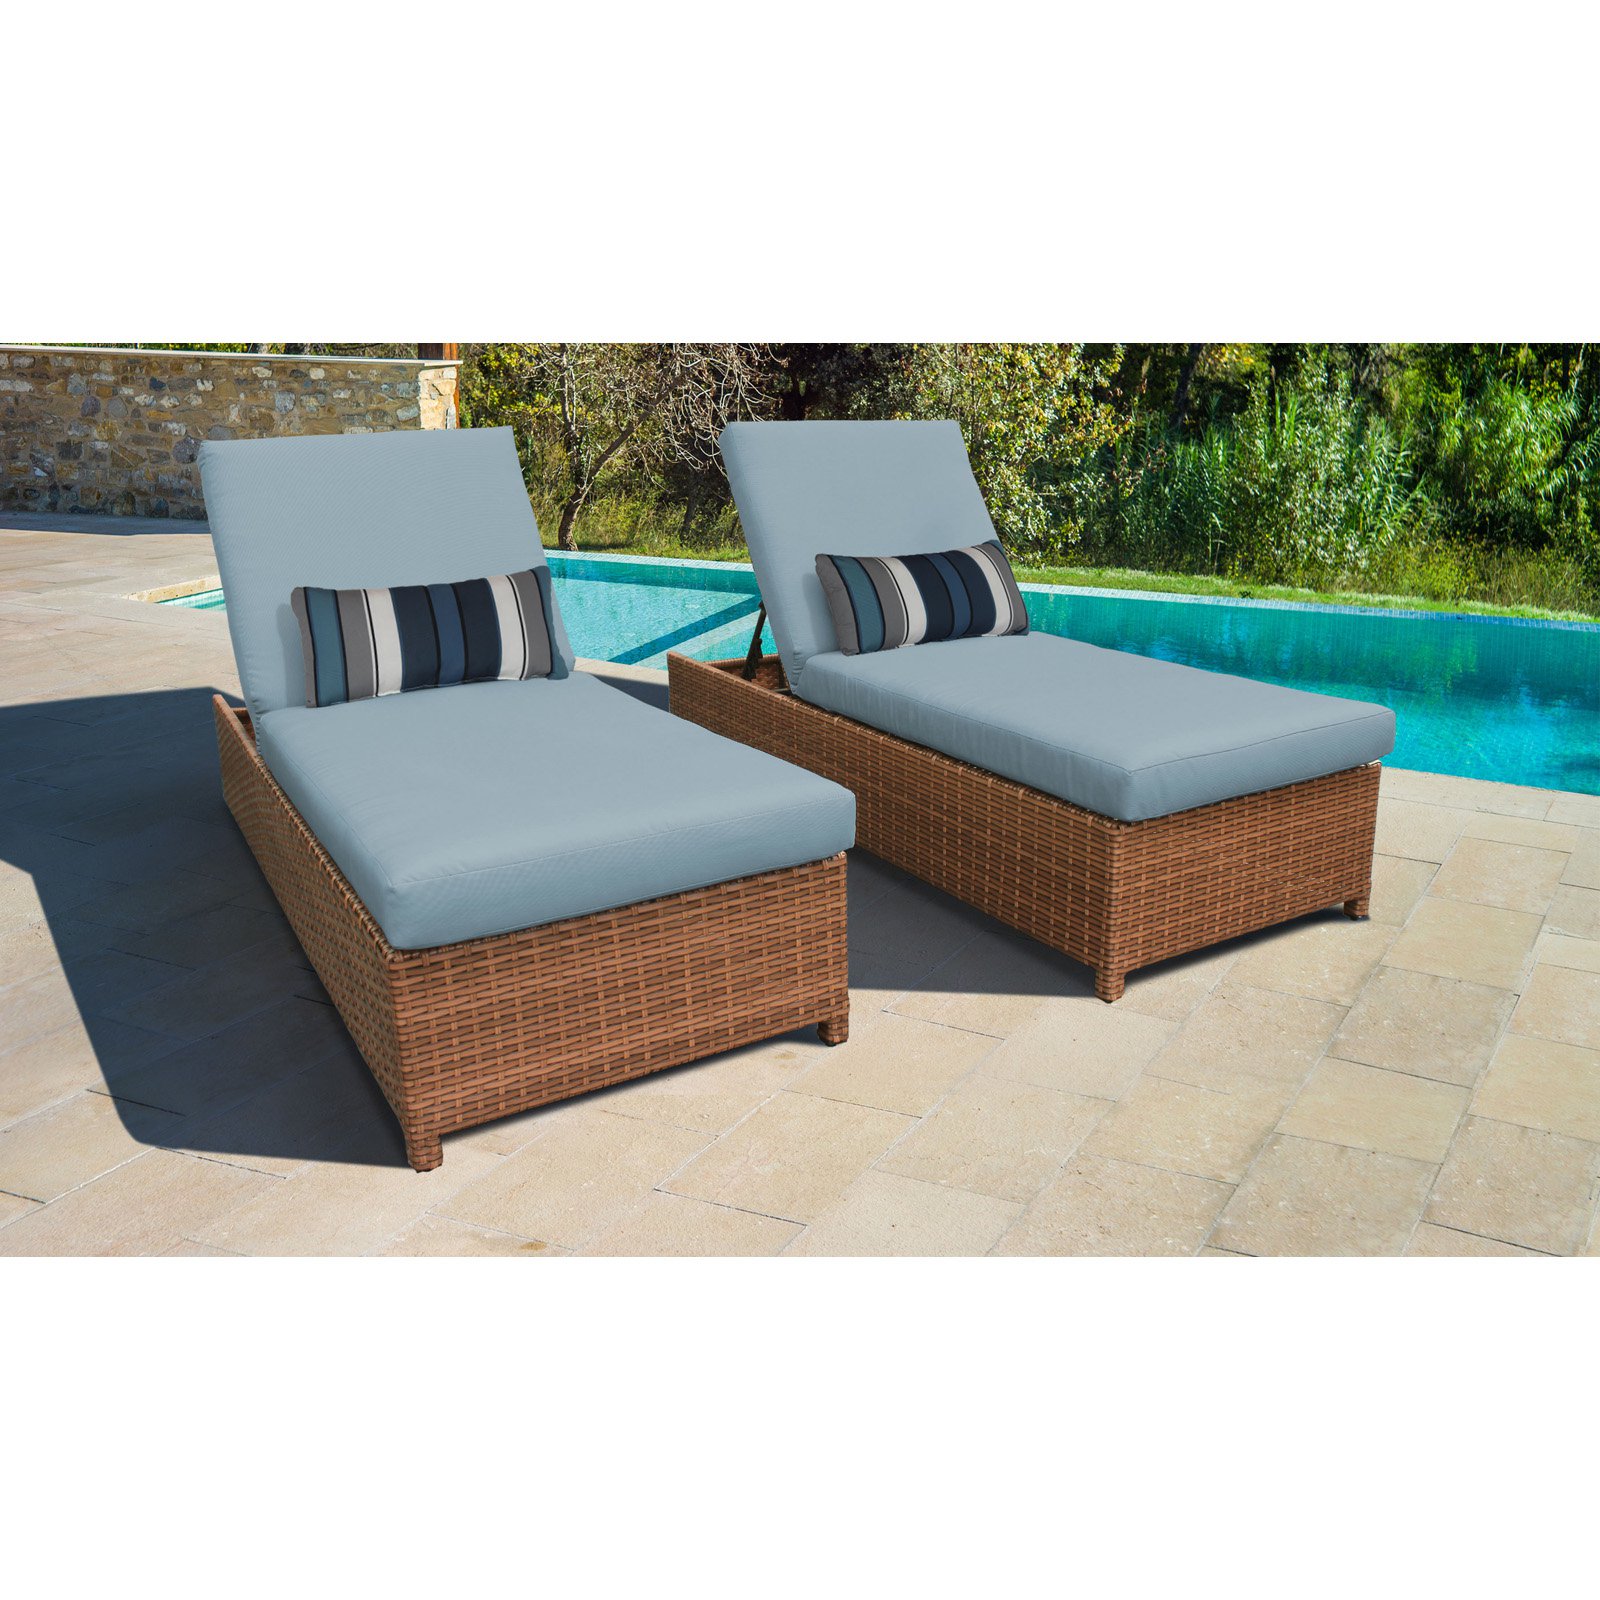 TK Classics Laguna Wheeled Wicker Outdoor Chaise Lounge Chair - Set of 2 - image 5 of 11